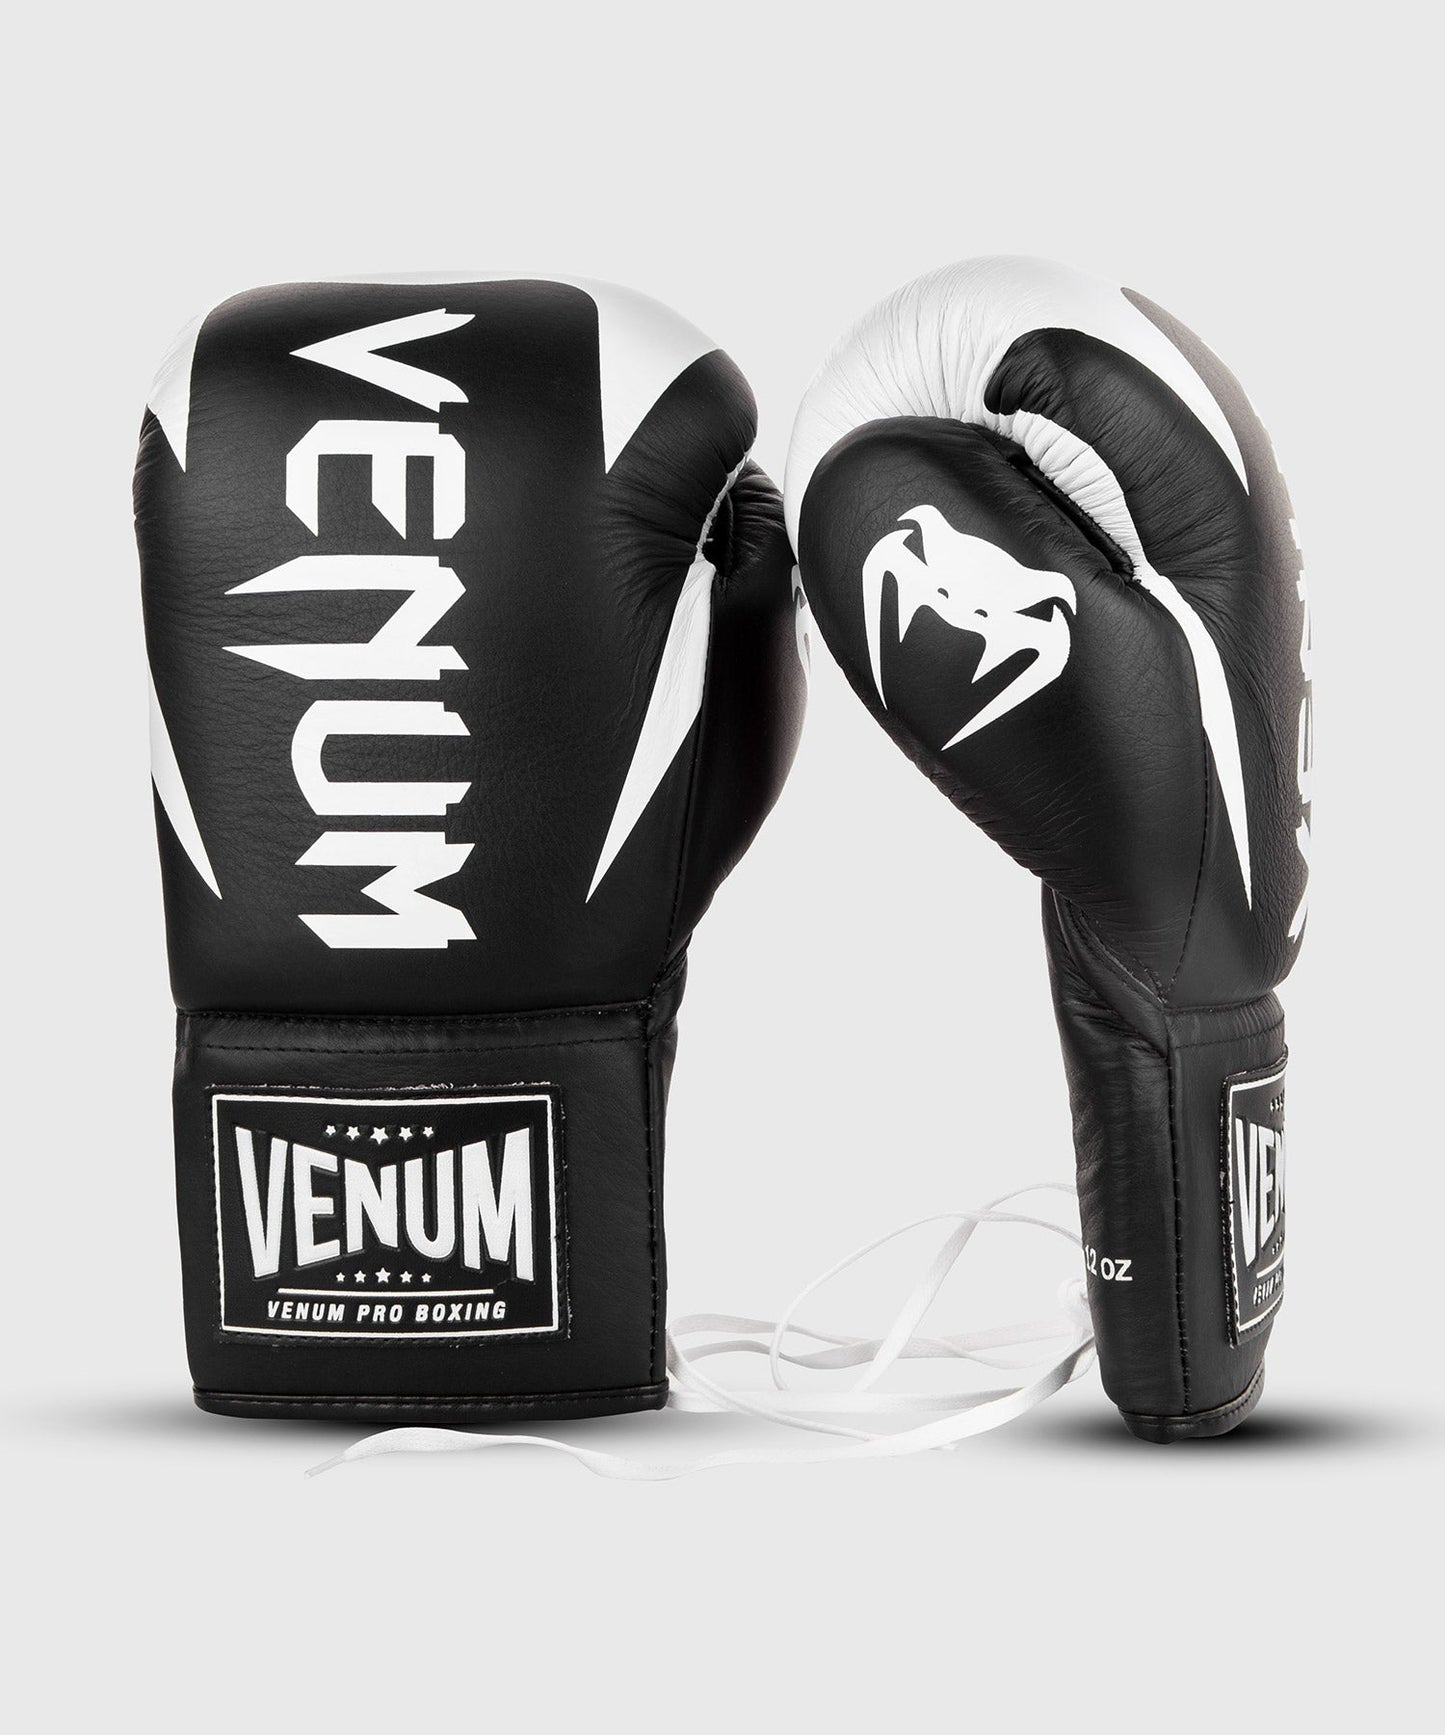 Venum Hammer Pro Boxing Gloves - With Laces - Black/White